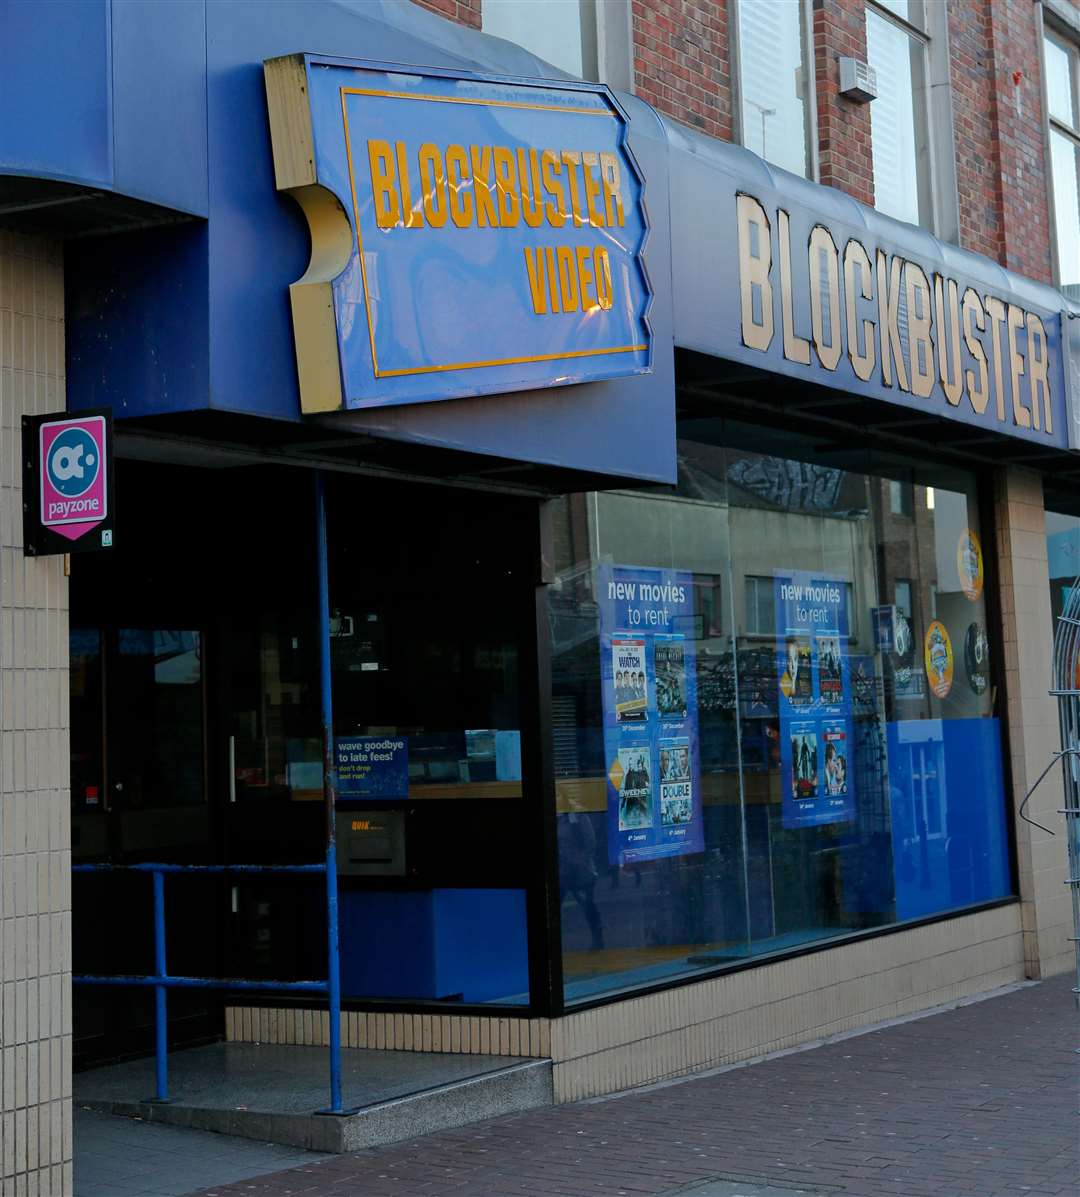 The Blockbuster in Week Street, Maidstone, is now a charity shop